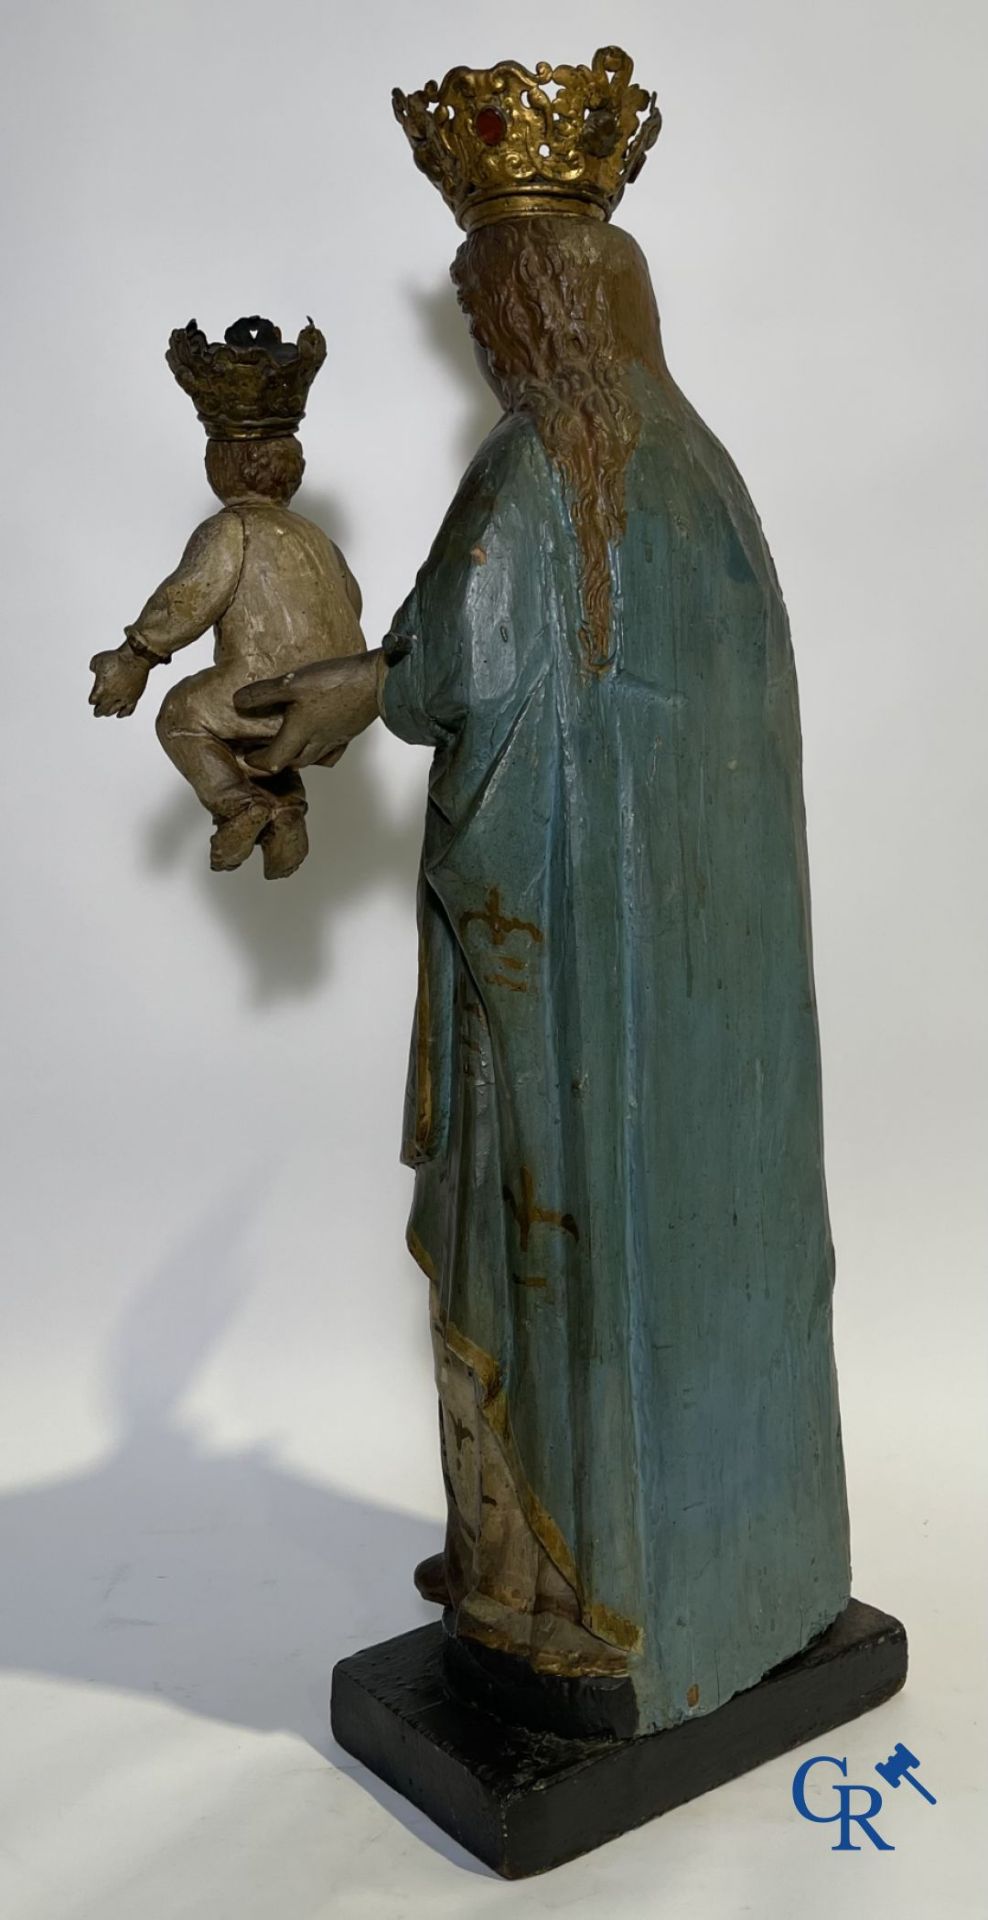 Wooden polychrome Baroque sculpture of Mary with child. The Crown inlaid with an amber-like rock. - Image 16 of 30